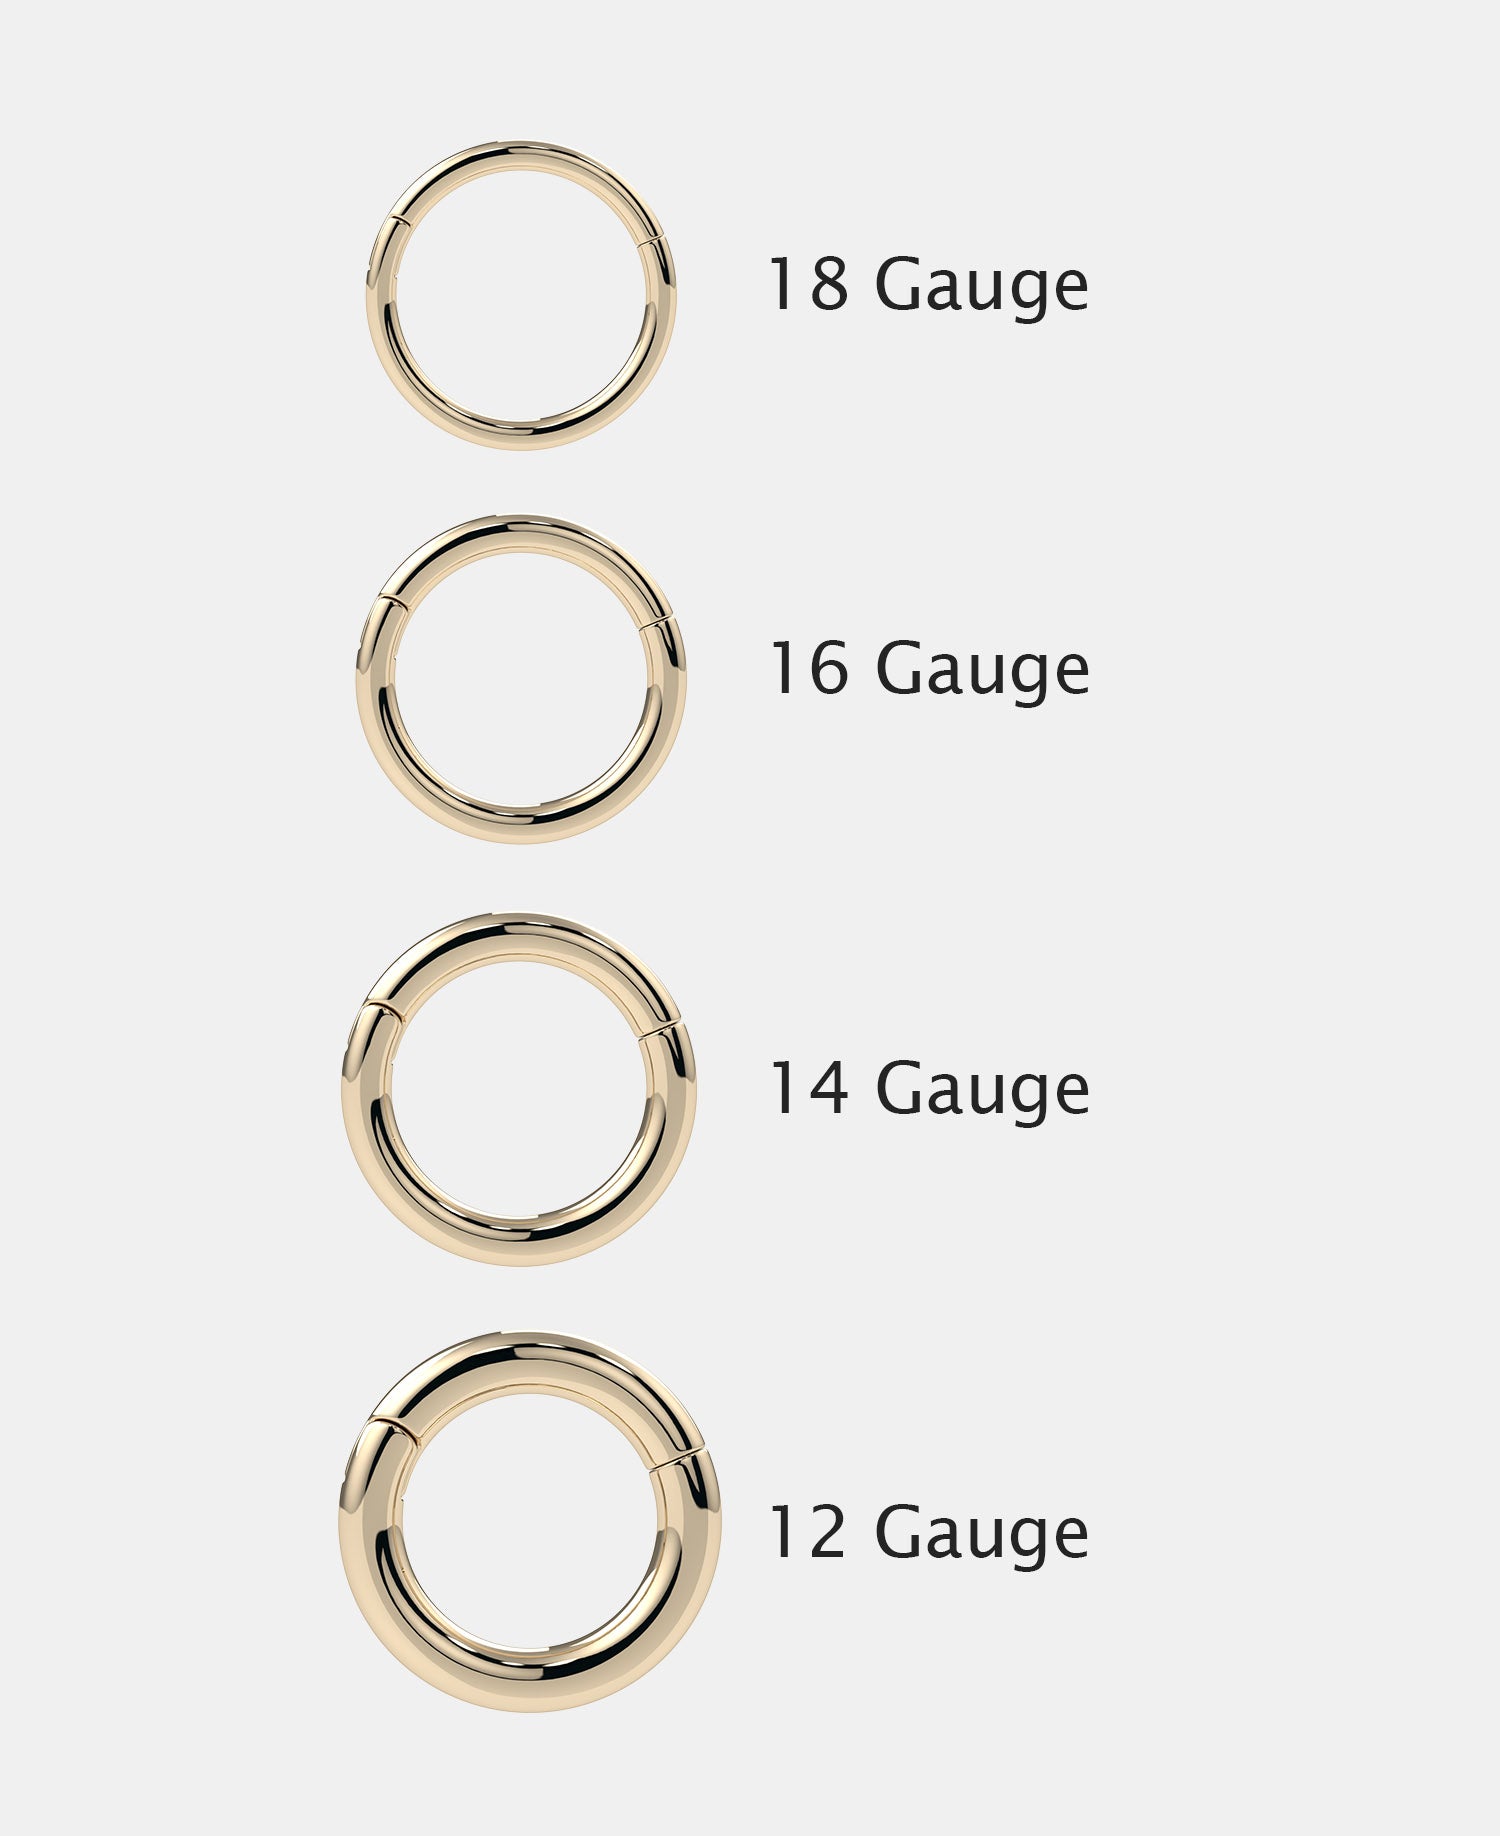 Gauge differences